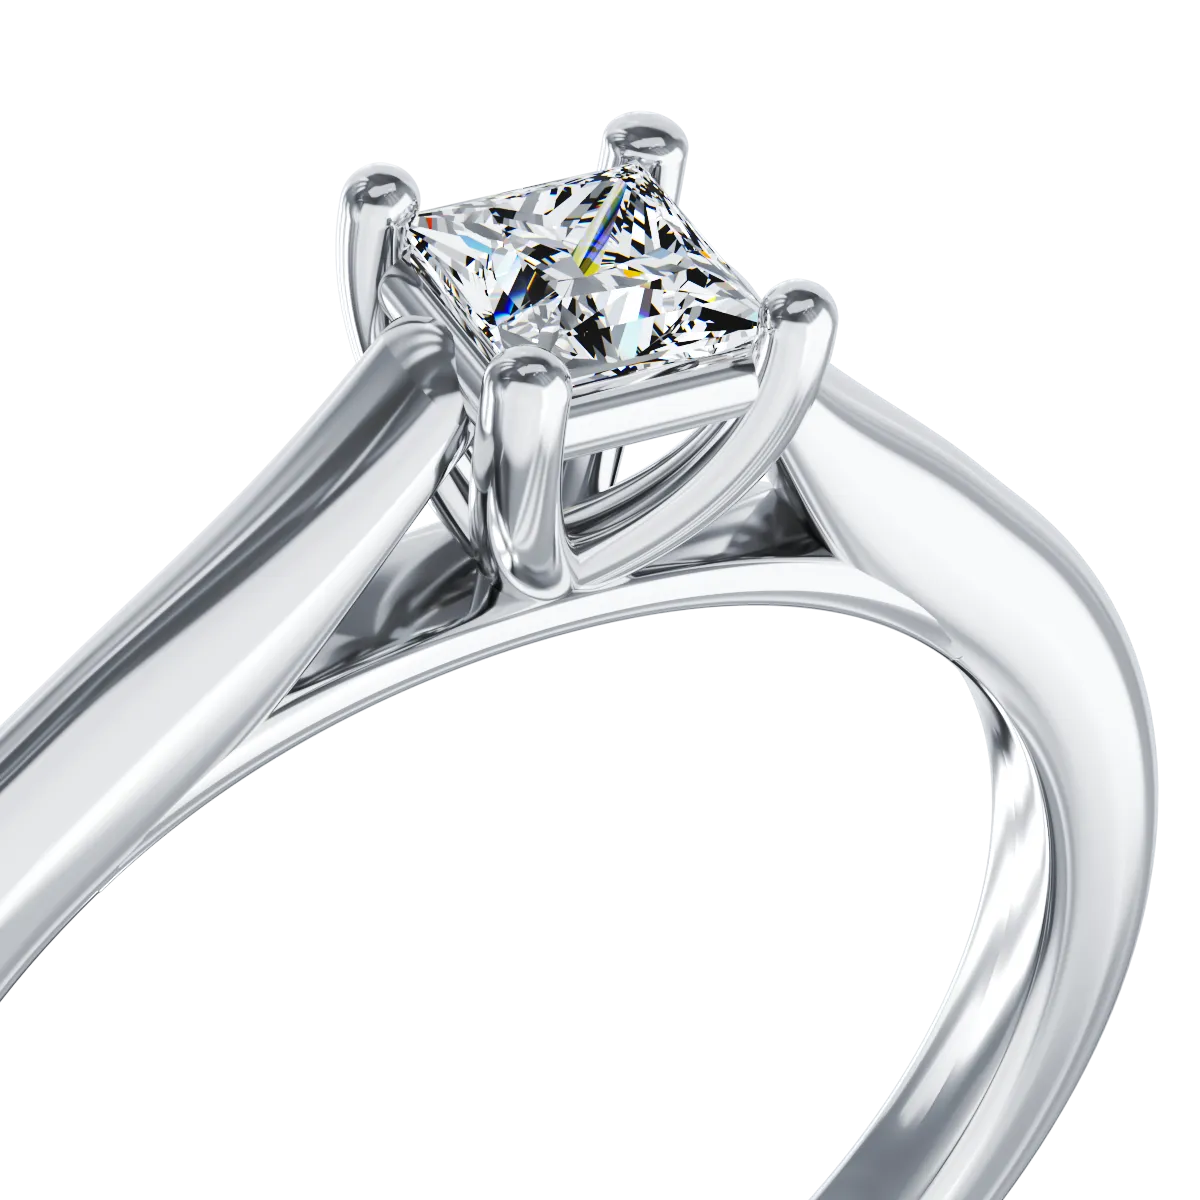 Platinum engagement ring with a 0.25ct solitaire diamond